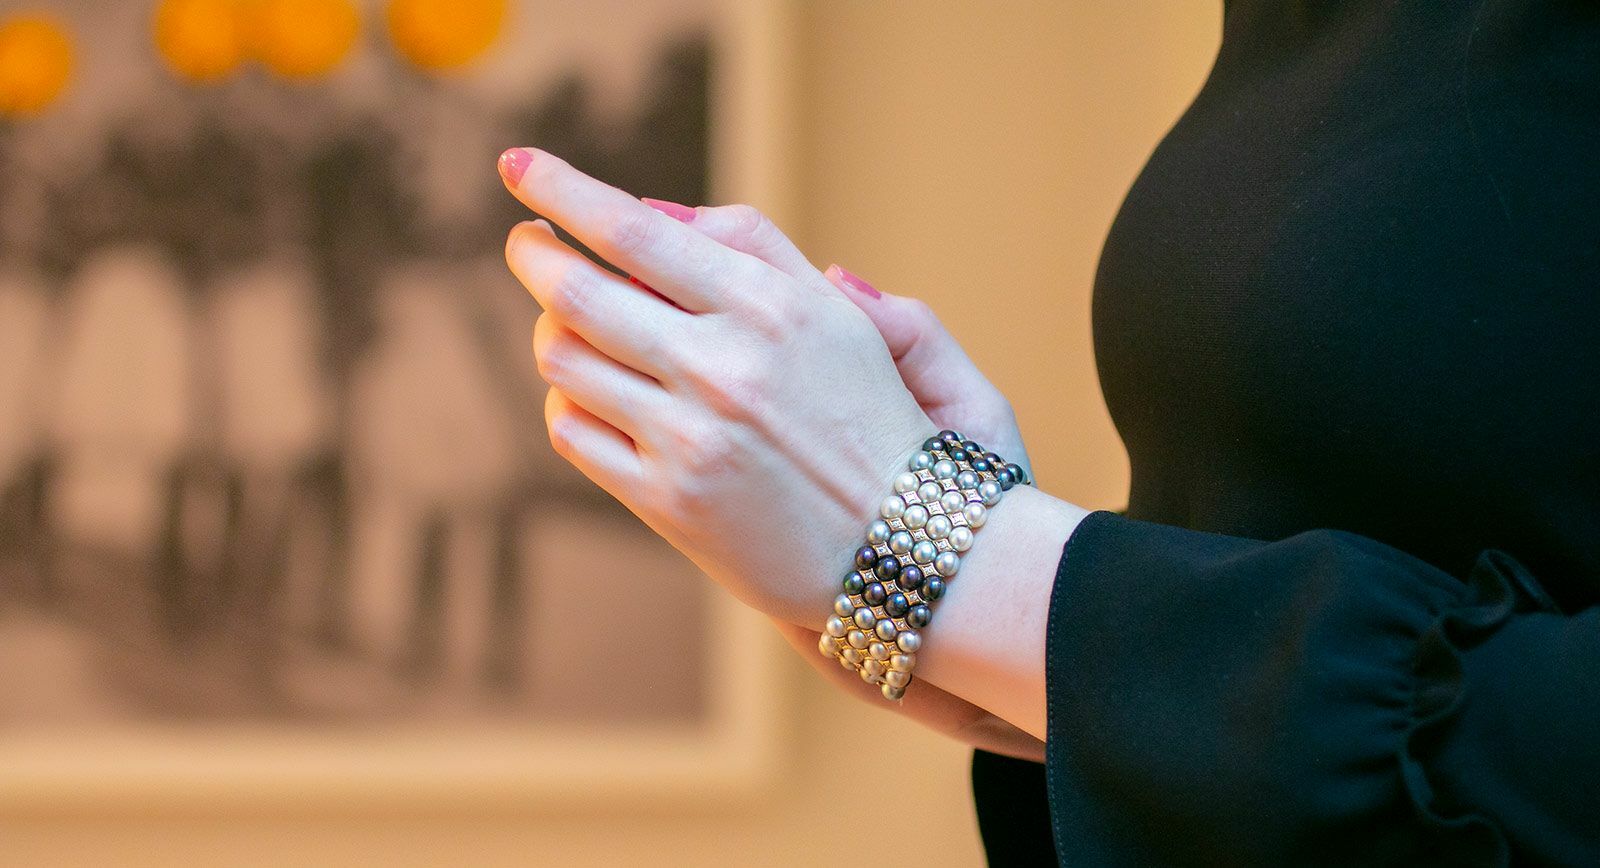 Carloris cultured pearl and diamond bracelet to be auctioned by Bonhams Paris in November 2021